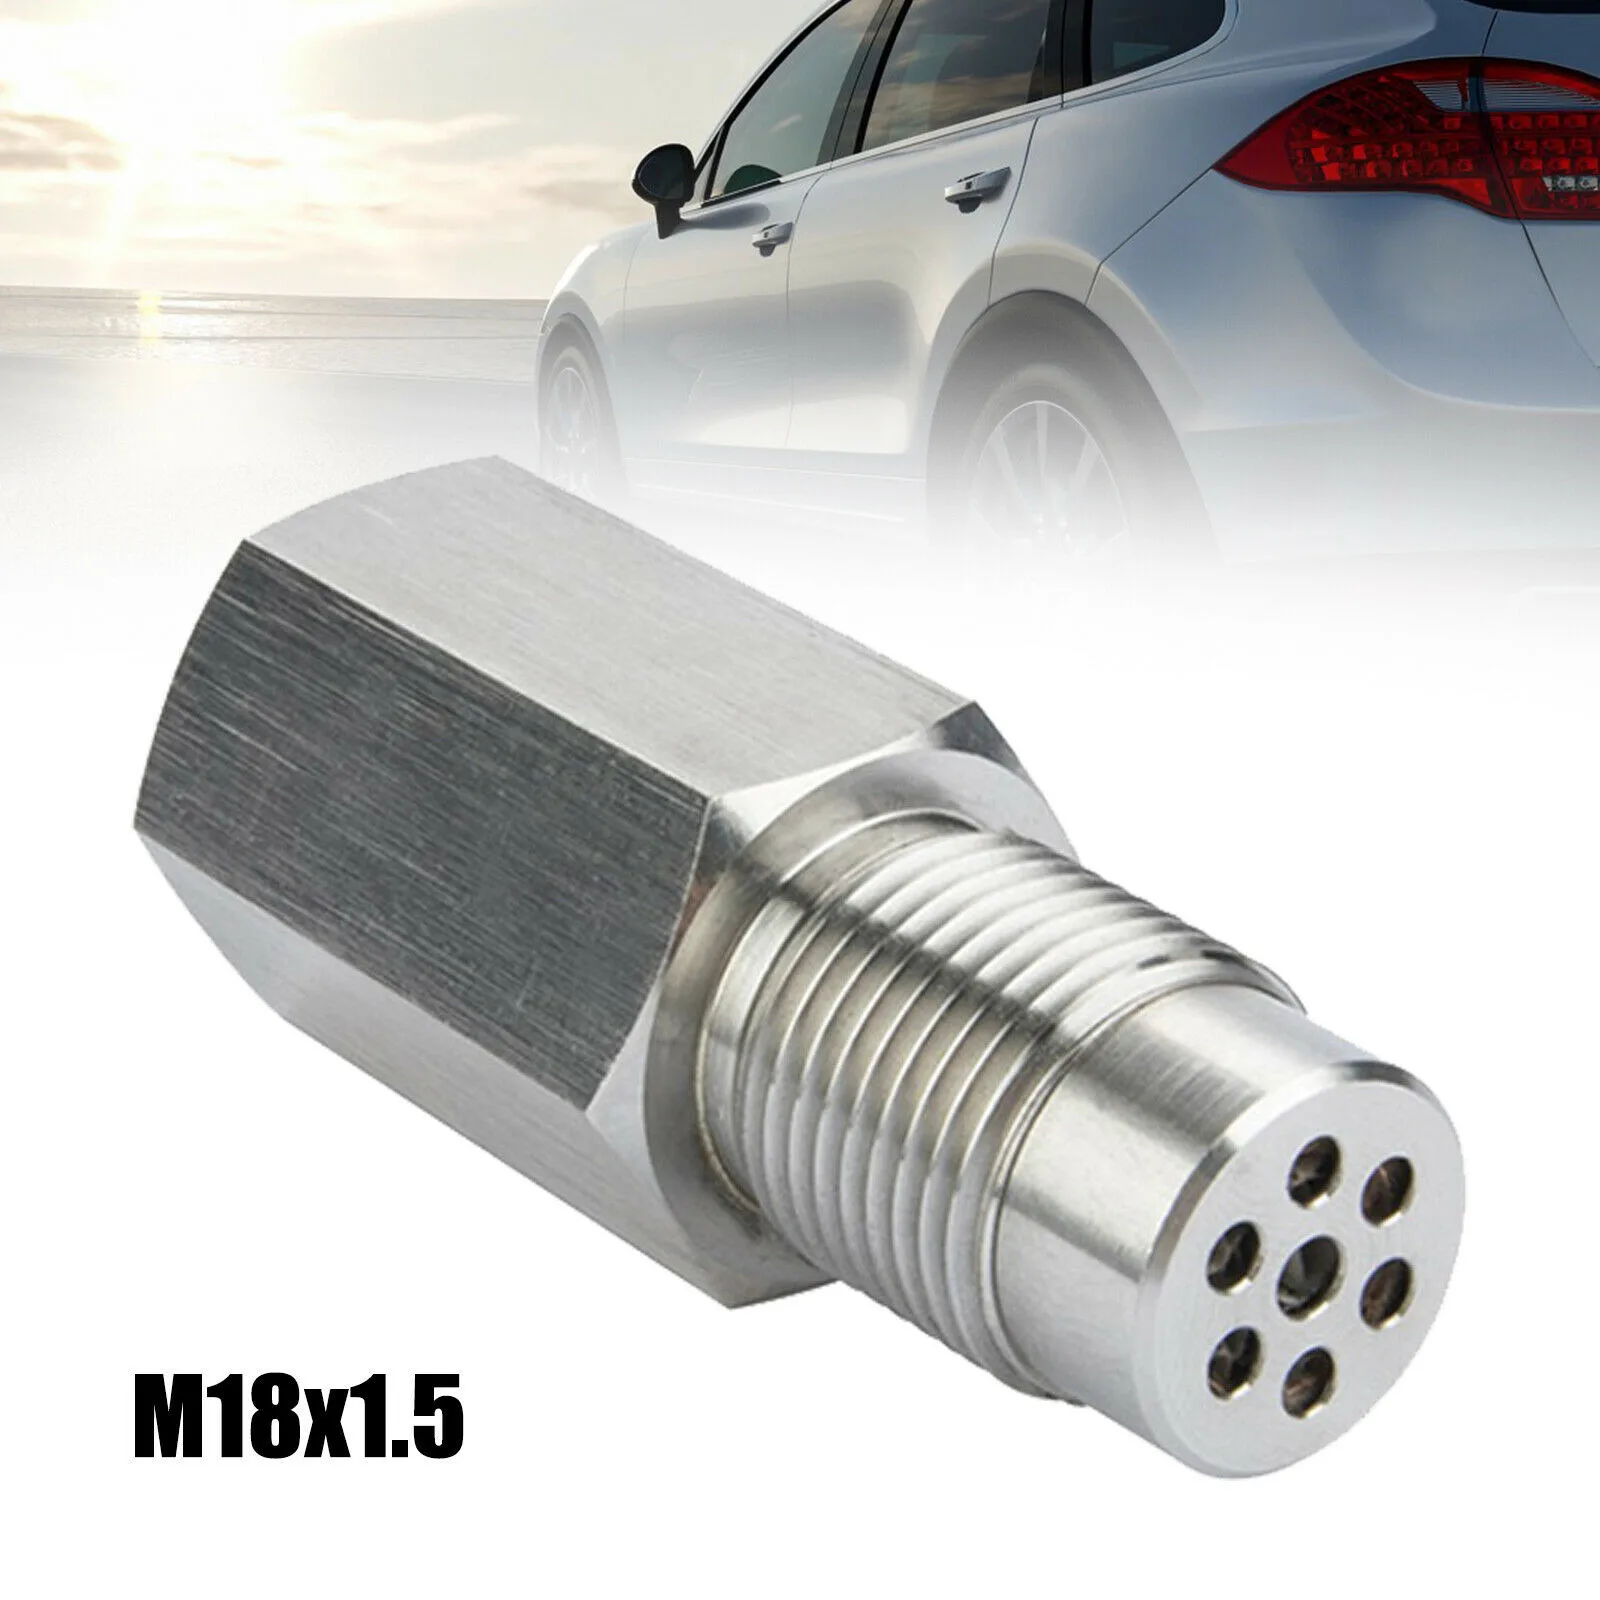 

Car O2 Oxygen Sensor Extender Spacer With Catalyst M18x1.5 For ​Decat Hydrogen Lambda O2 Extender Spacer Fix Engine Accessories